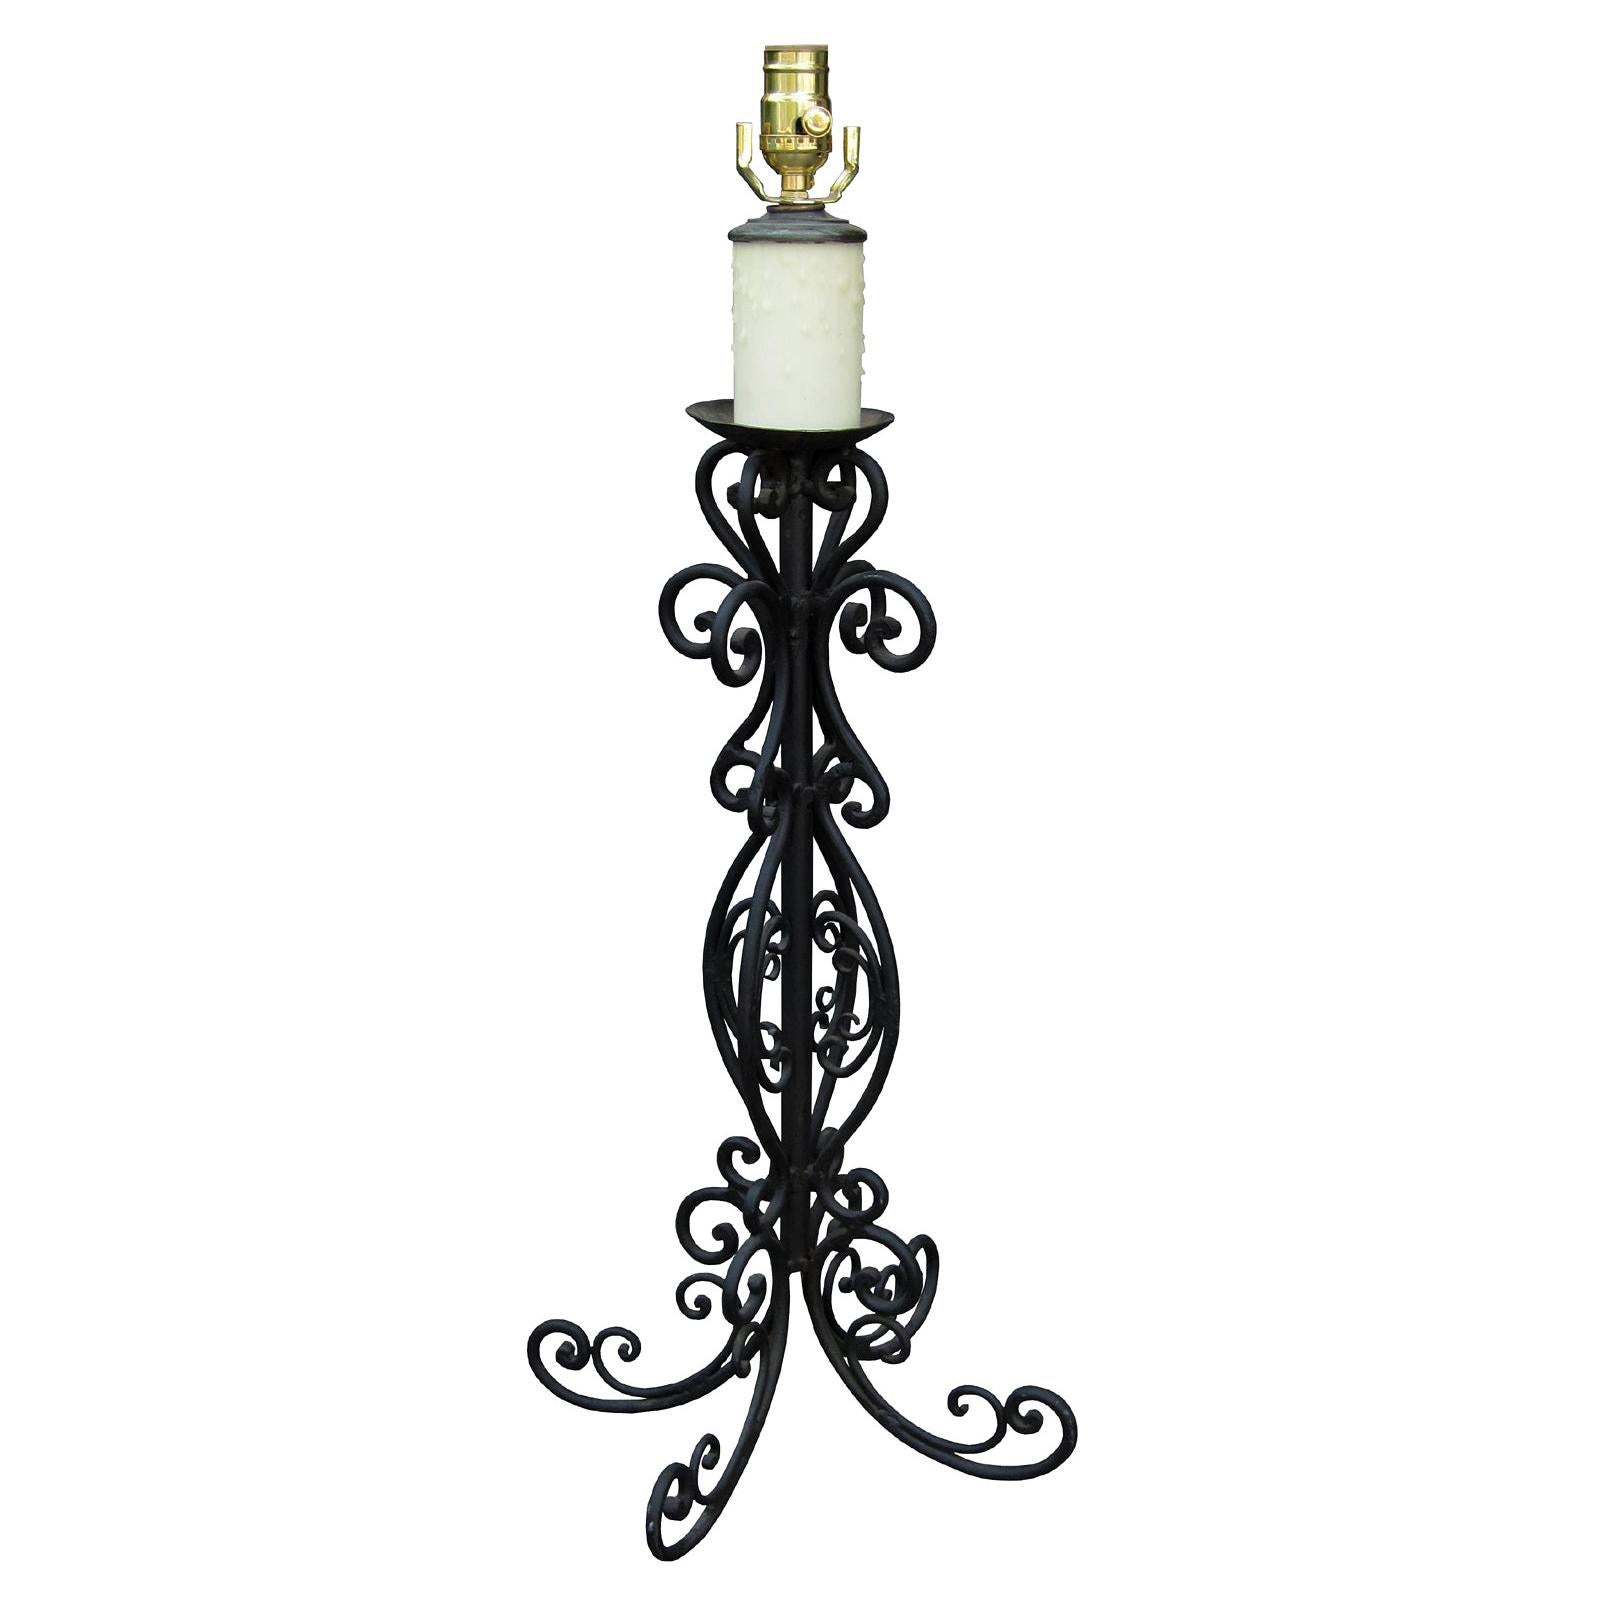 Mid-20th Century Wrought Iron Candlestick as Lamp